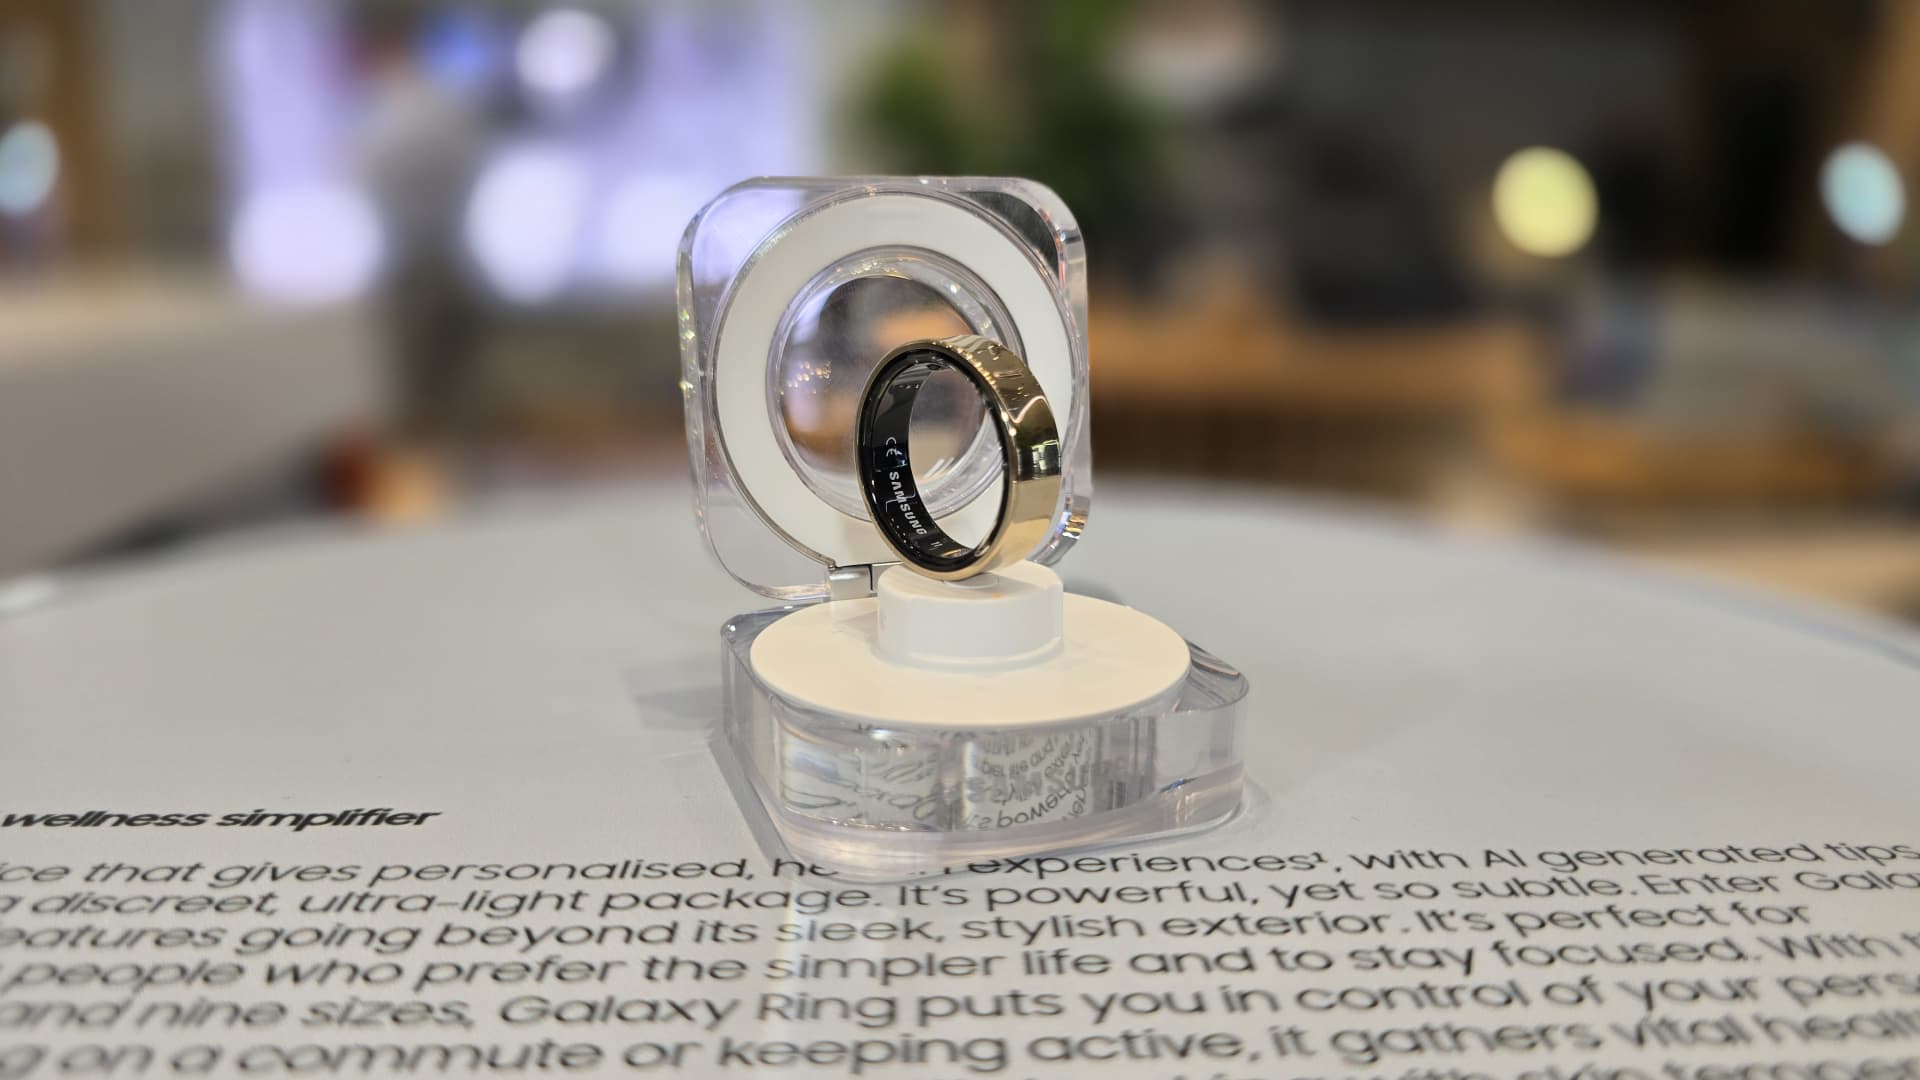 Samsung Galaxy Ring launch: price, specs, features, availability